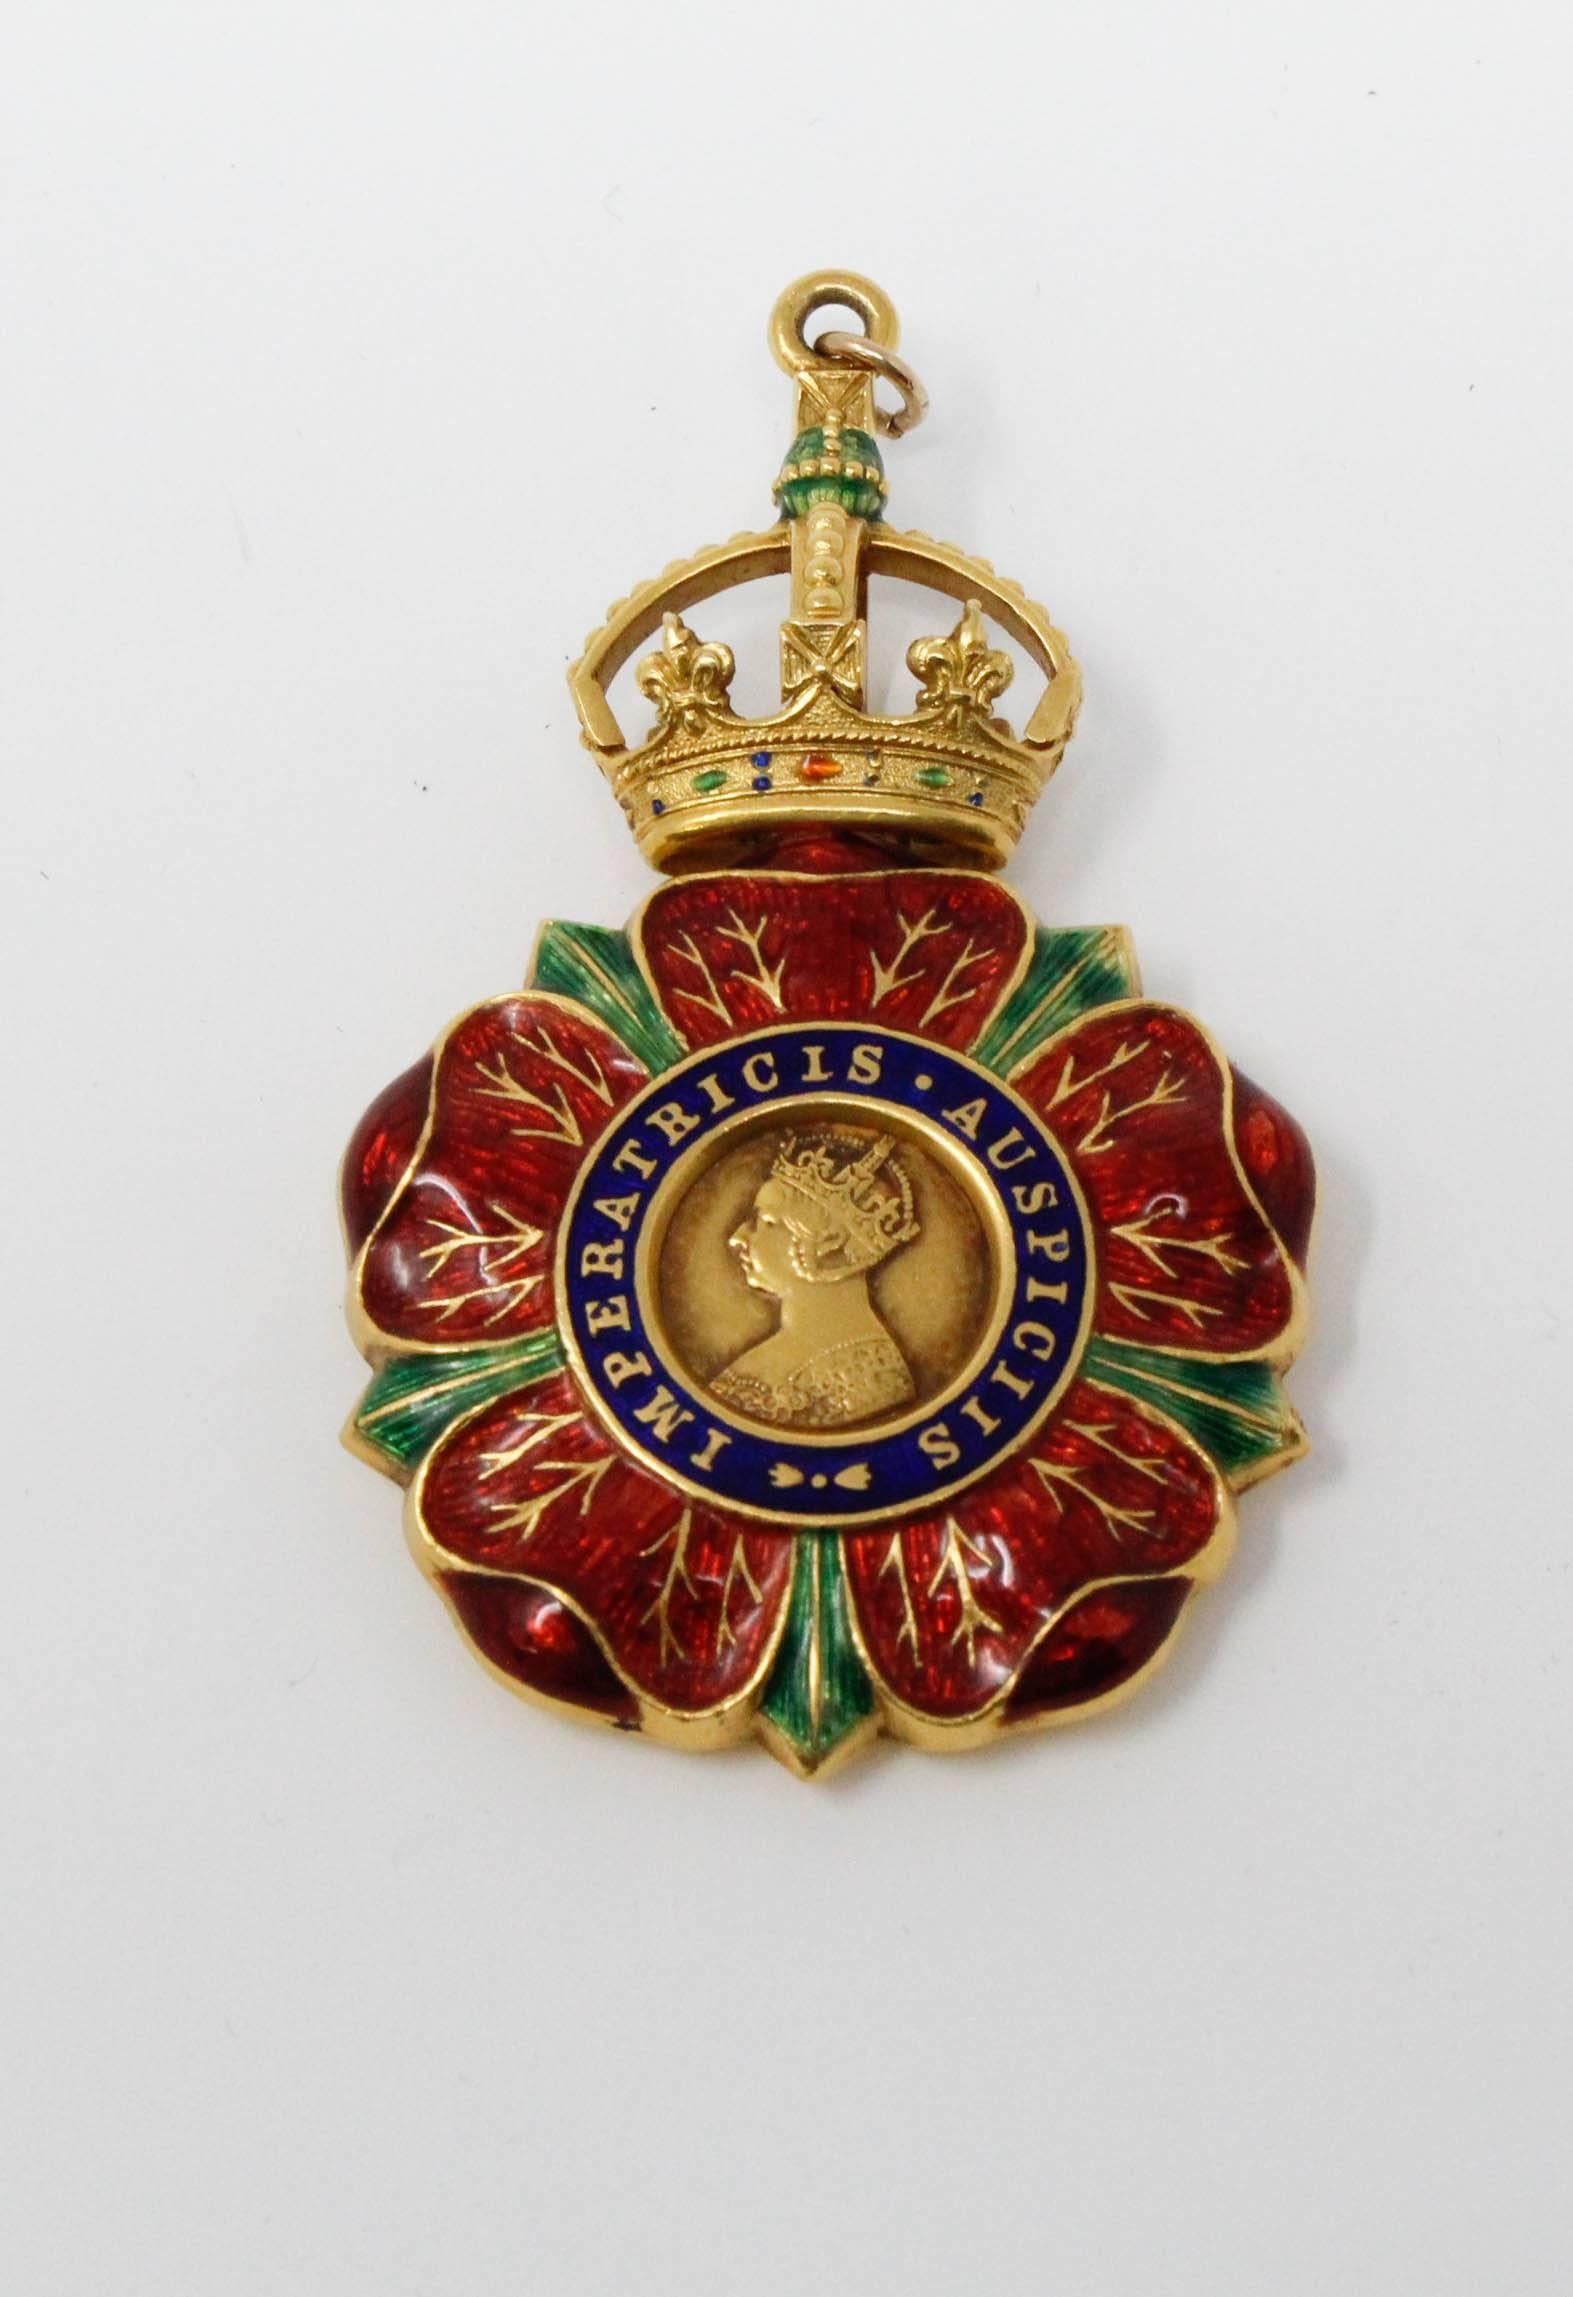 Badge of The Most Eminent Order of the Indian Empire. 18 kt yellow gold and enamel. The Most Eminent Order of the Indian Empire was founded by Queen Victoria in 1878, and became dormant in 2010 upon the death of the last member. Notable members have